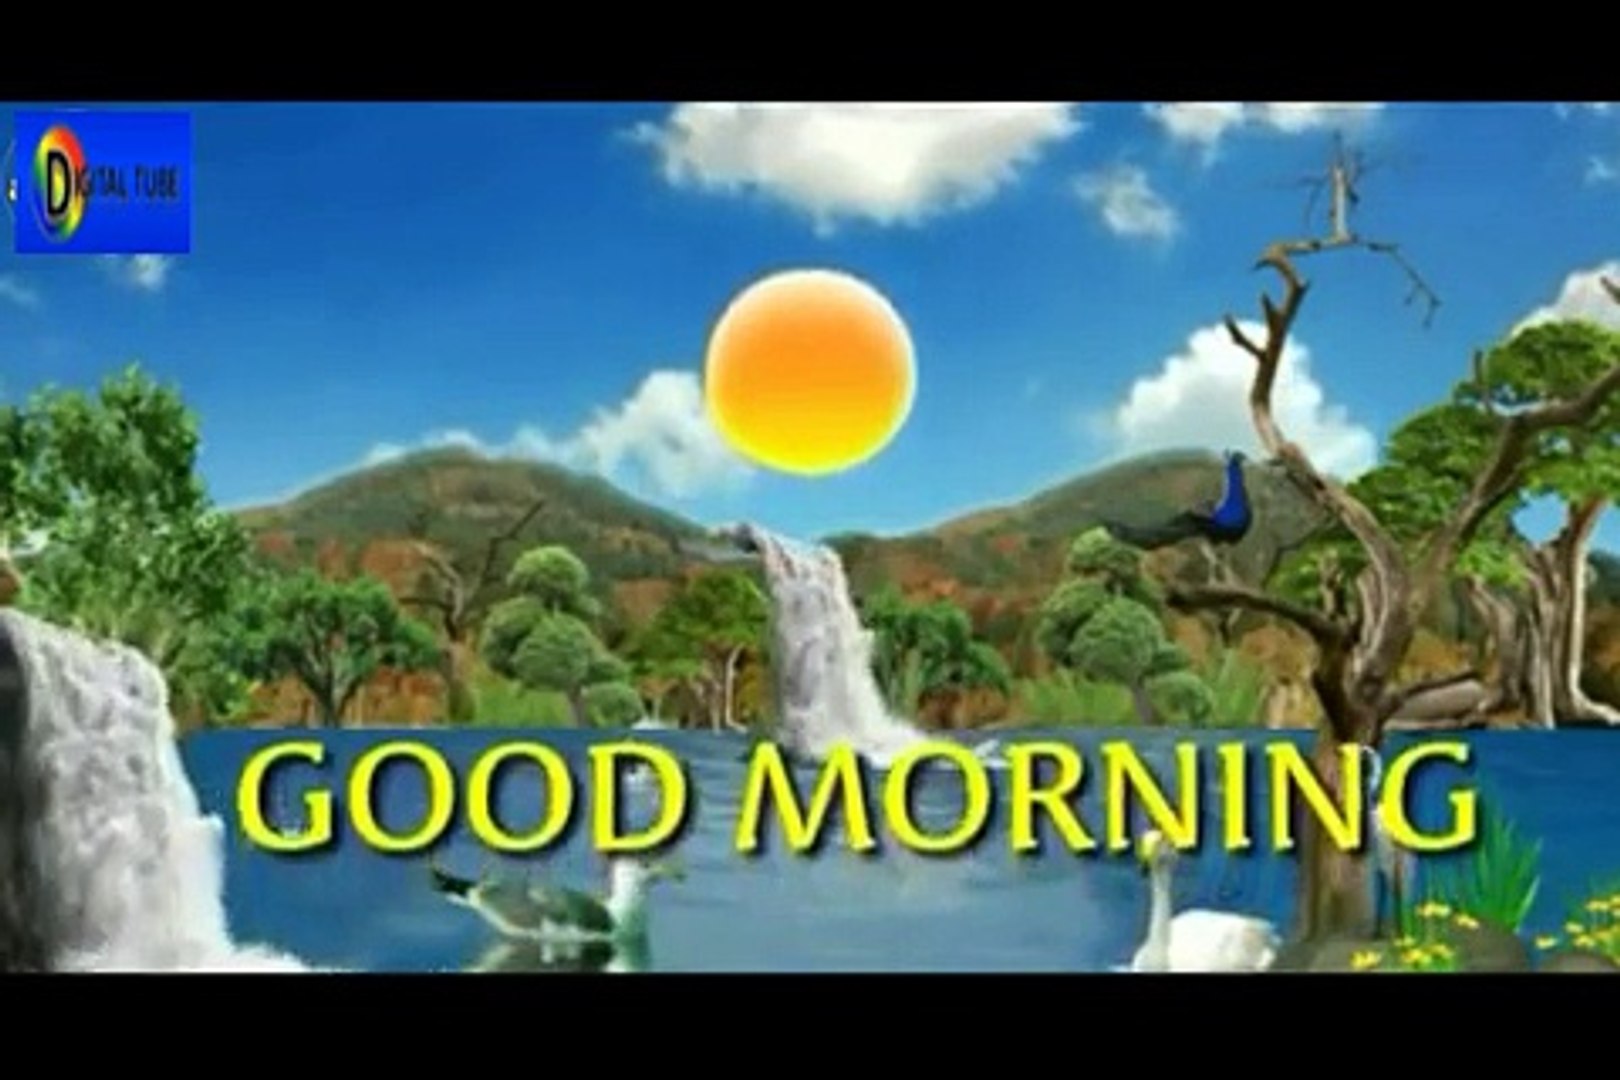 Good Morning- Beautiful nice animation with natural scenery. Wish ...